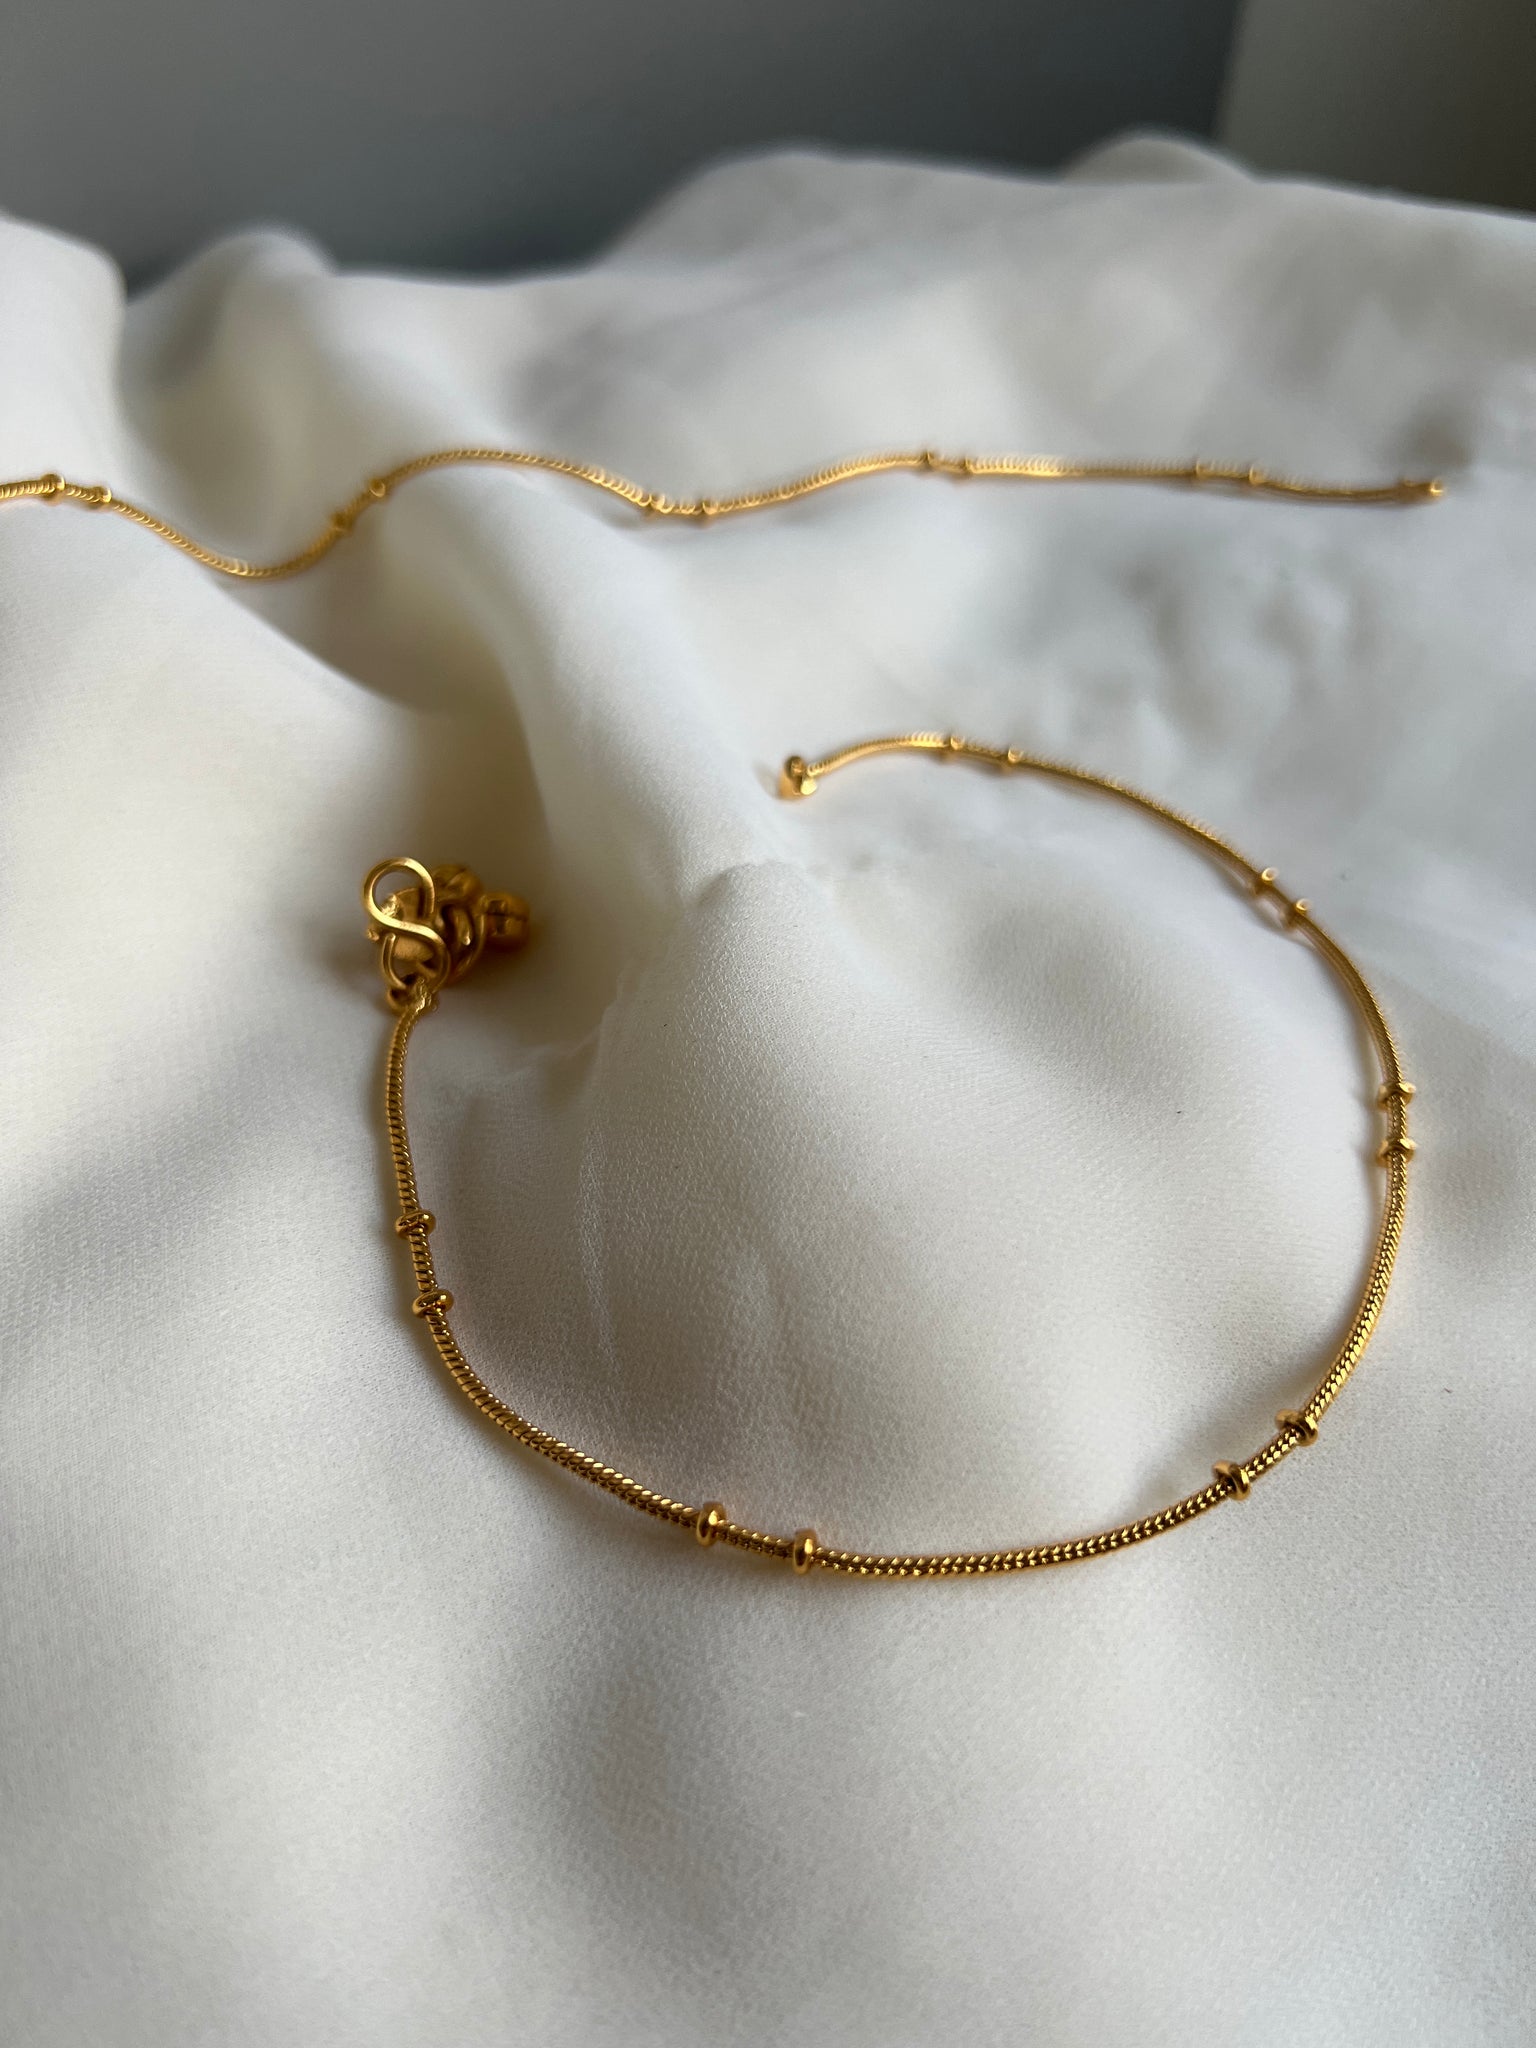 Simple Kerala style anklets